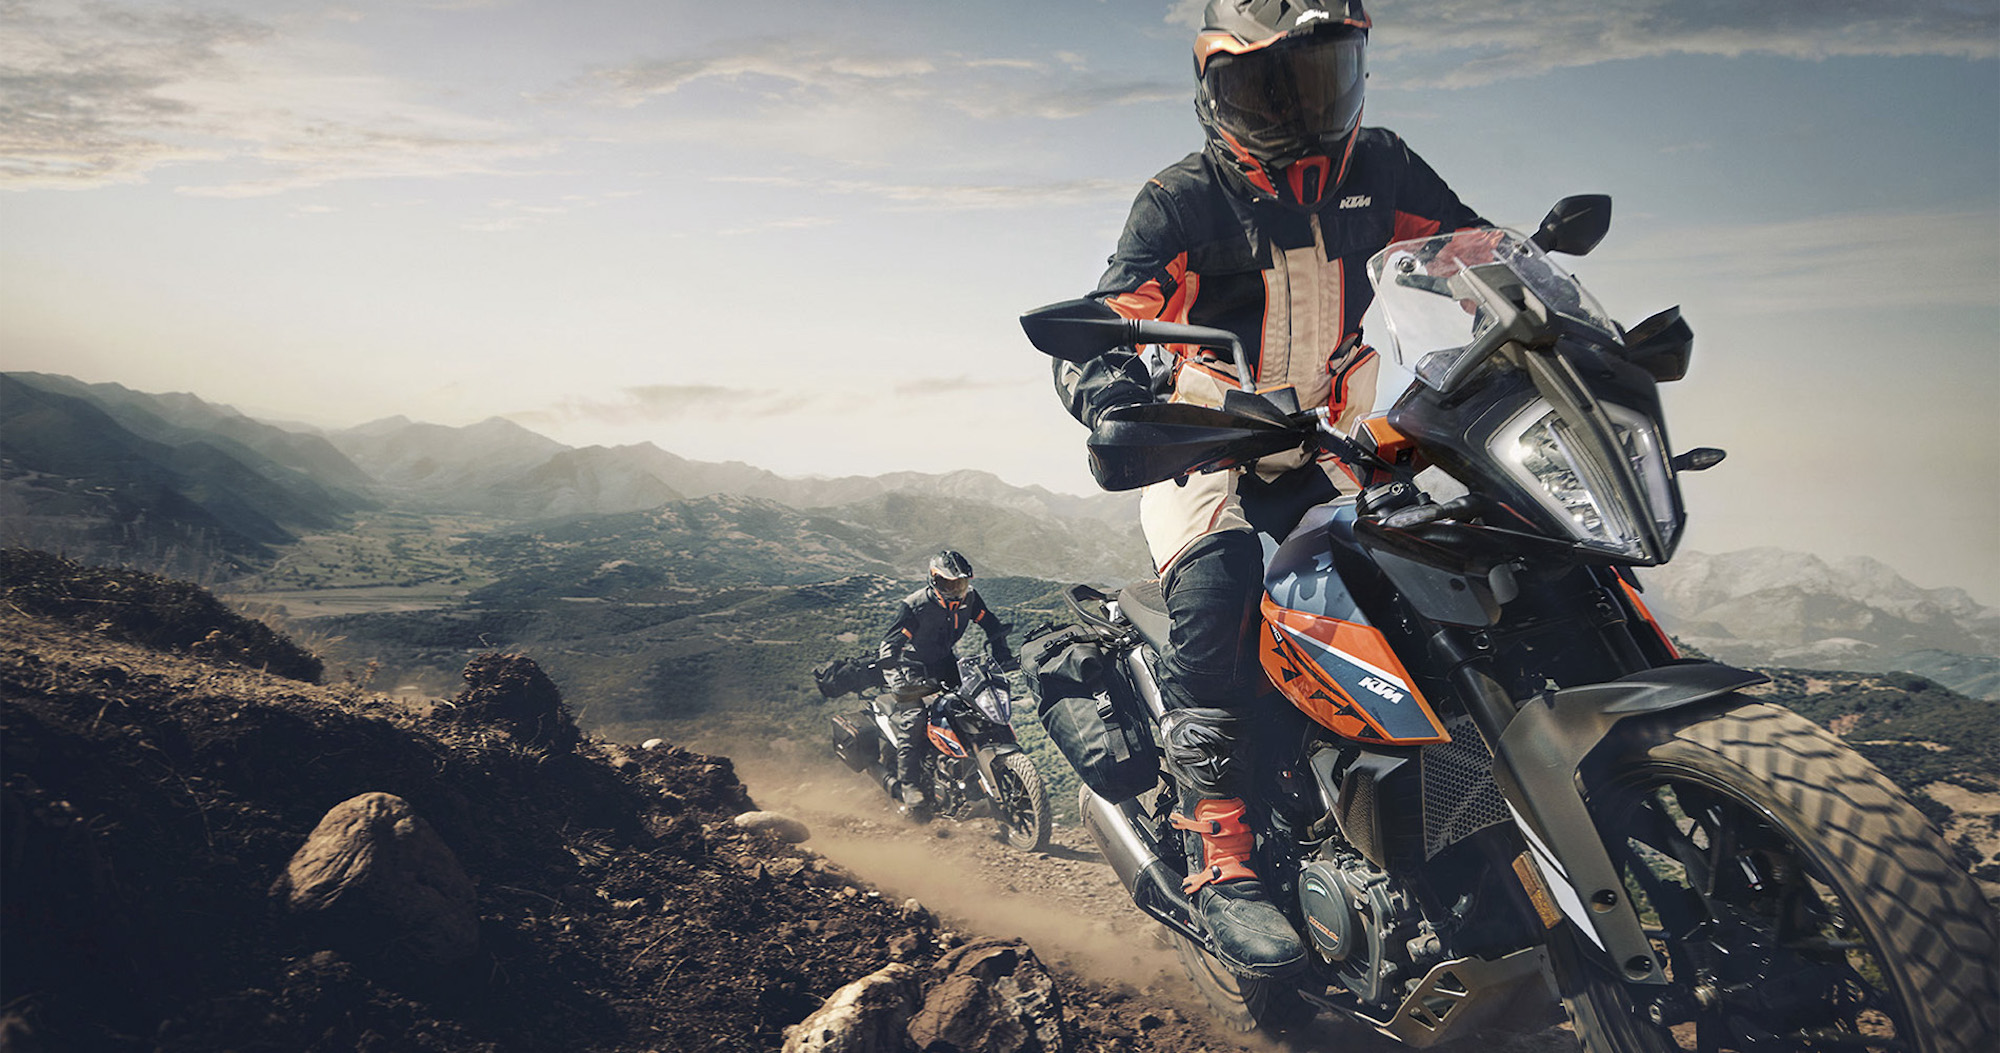 KTM's 390 Adventure, which now features a Low Seat variant. Media sourced from KTM. 